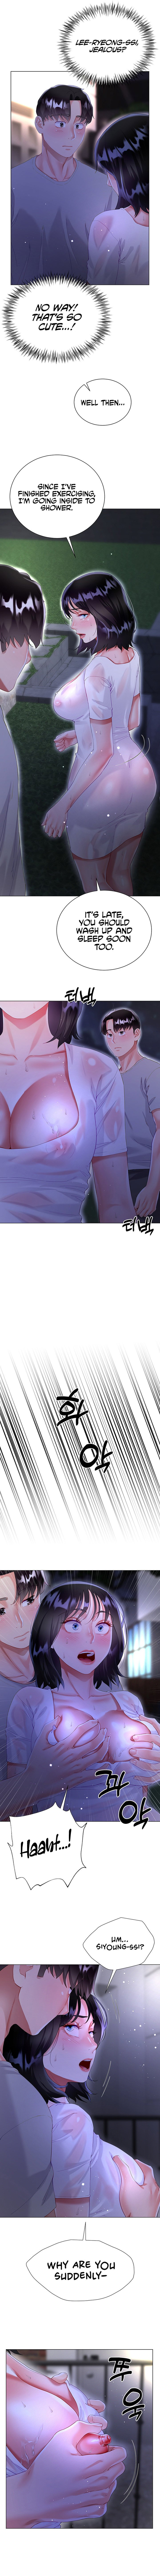 my-sister-in-laws-skirt-chap-35-3